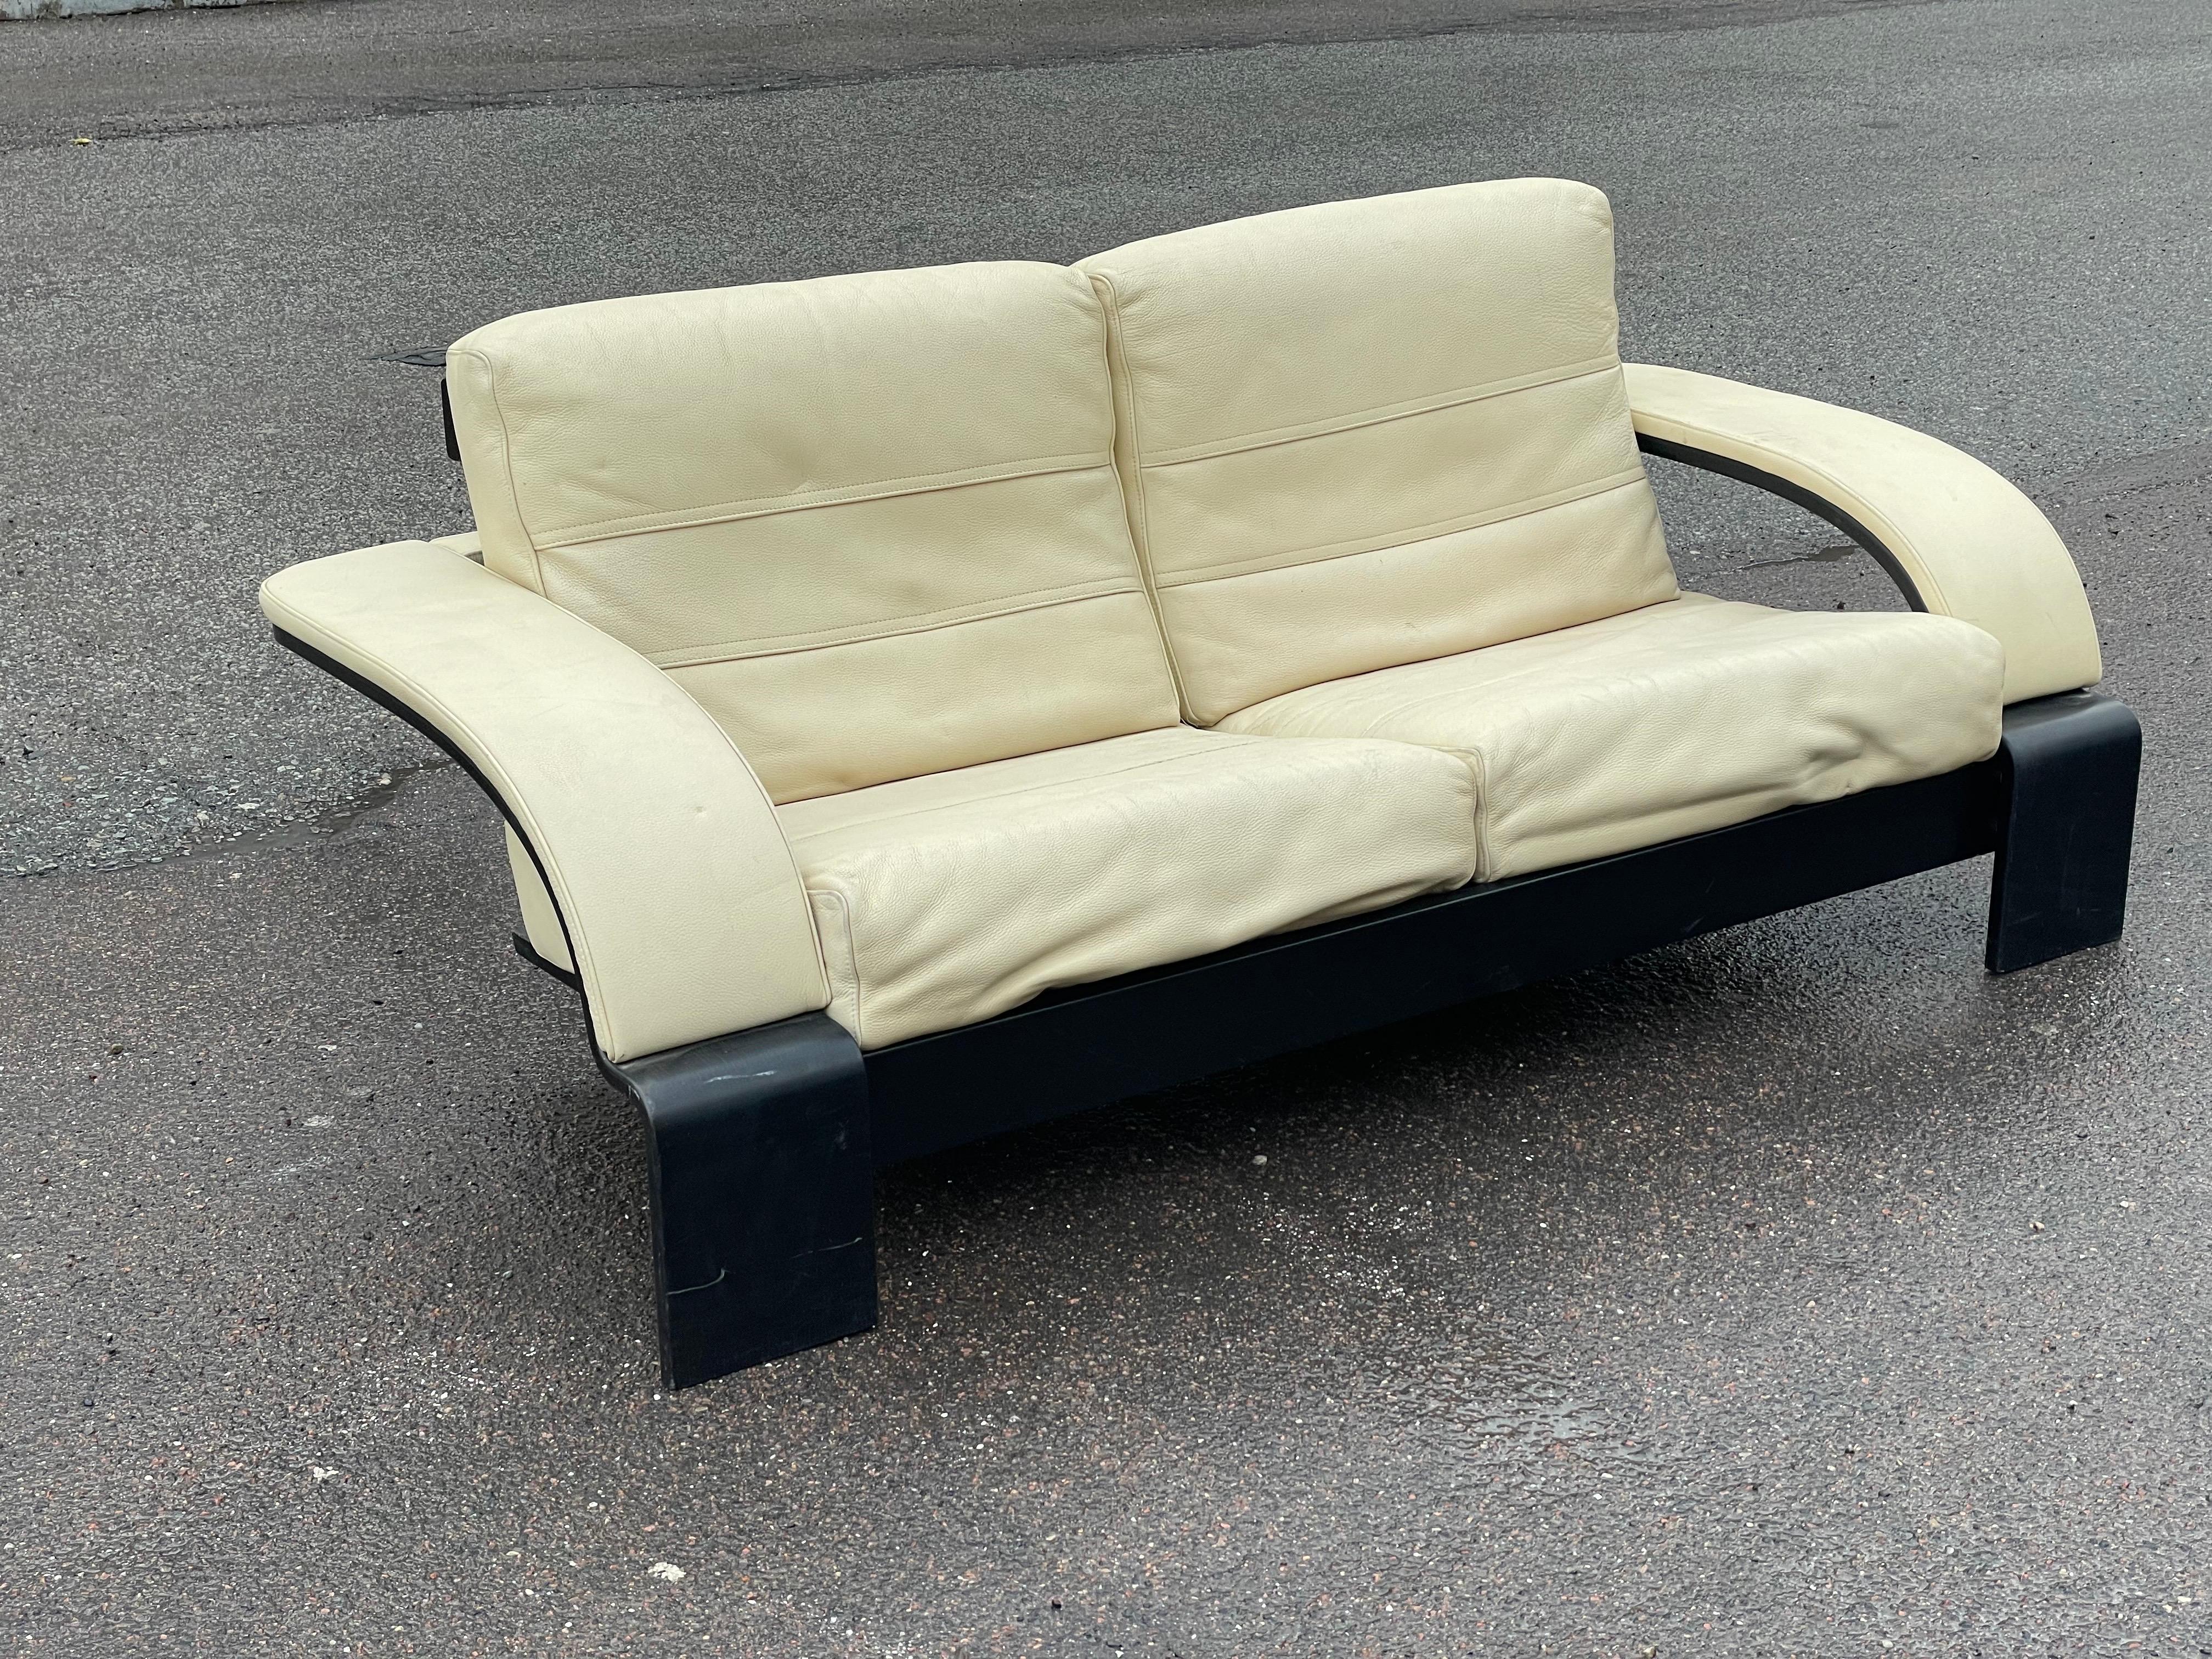 French Kroken Sofa, Roche Bobois Edition, by Ake Fribytter, 1980s For Sale